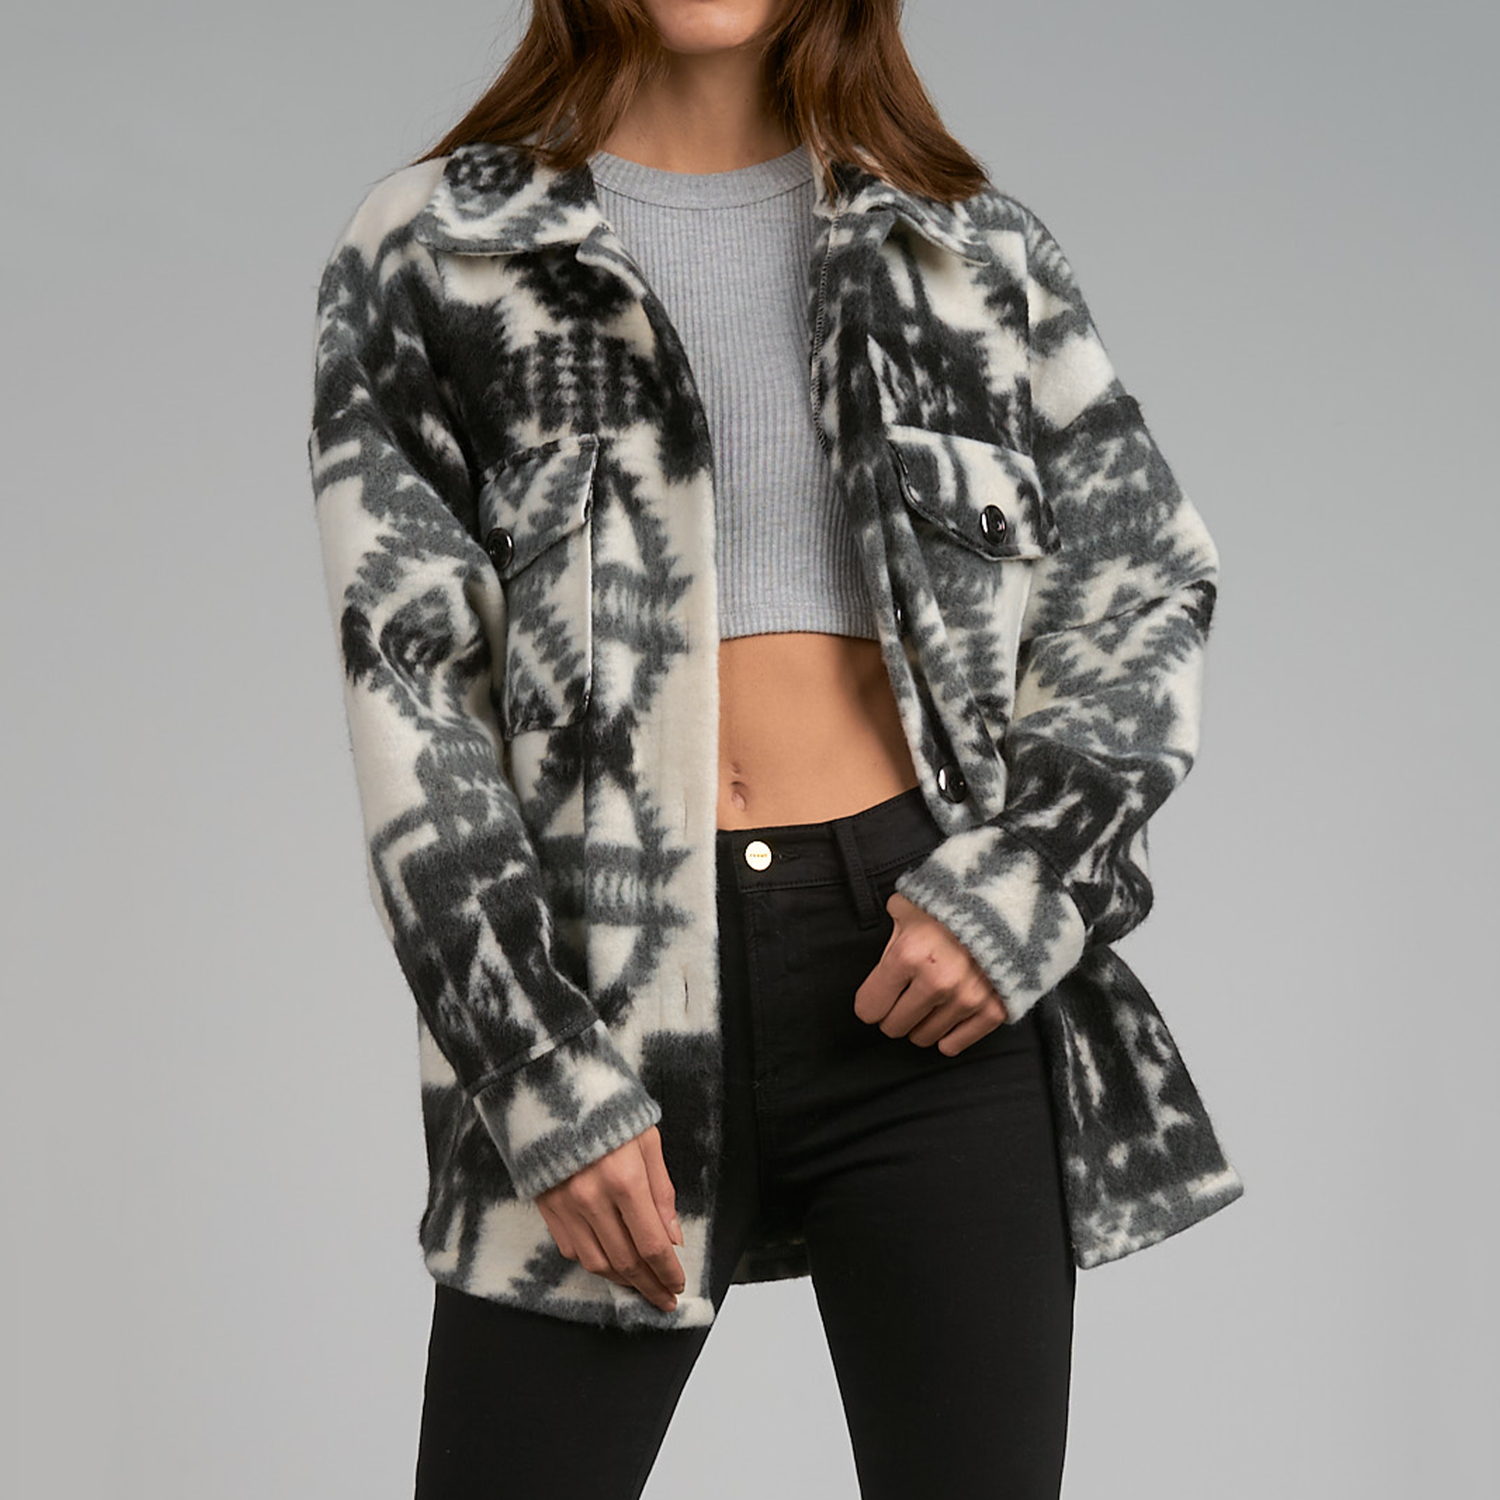 Elan Brush Print Jacket. This jacket is so stylish and unique! Take it on your next mountain trip or wear it out to dinner. The bold print is sure to stand out